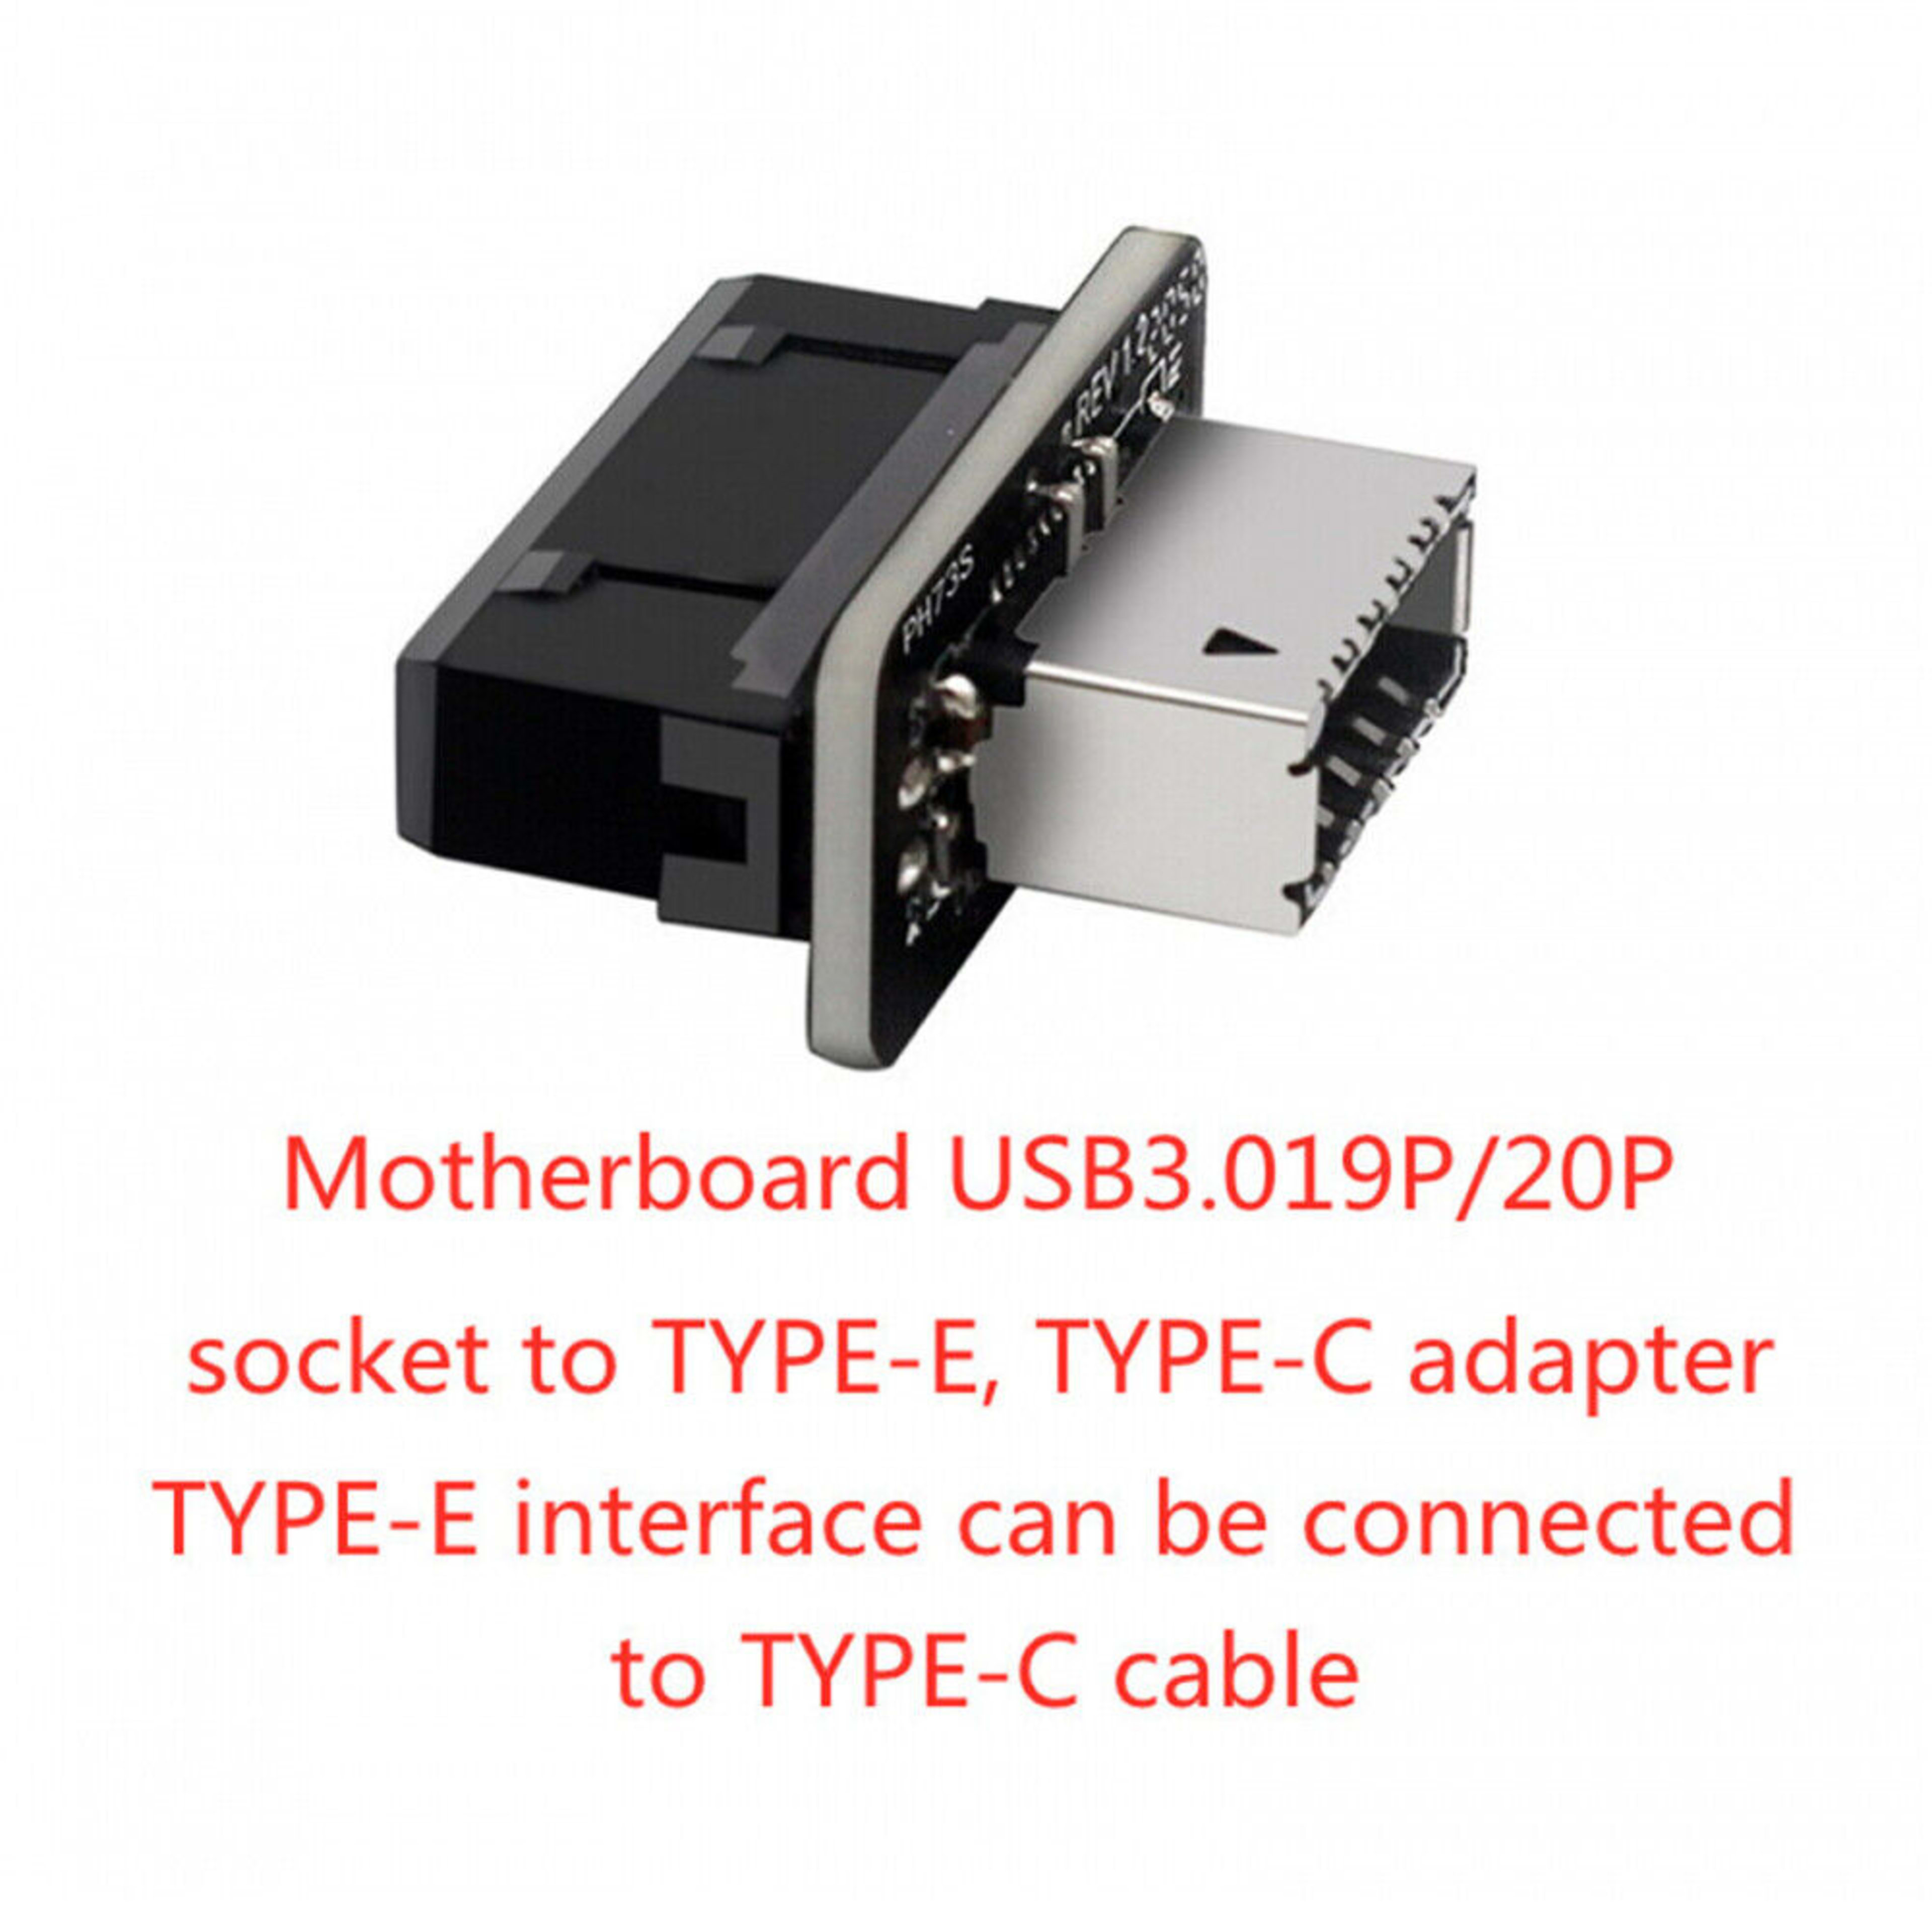 USB 3.0 Internal Header to USB 3.1/3.2 Type C Converter For Computer Motherboard